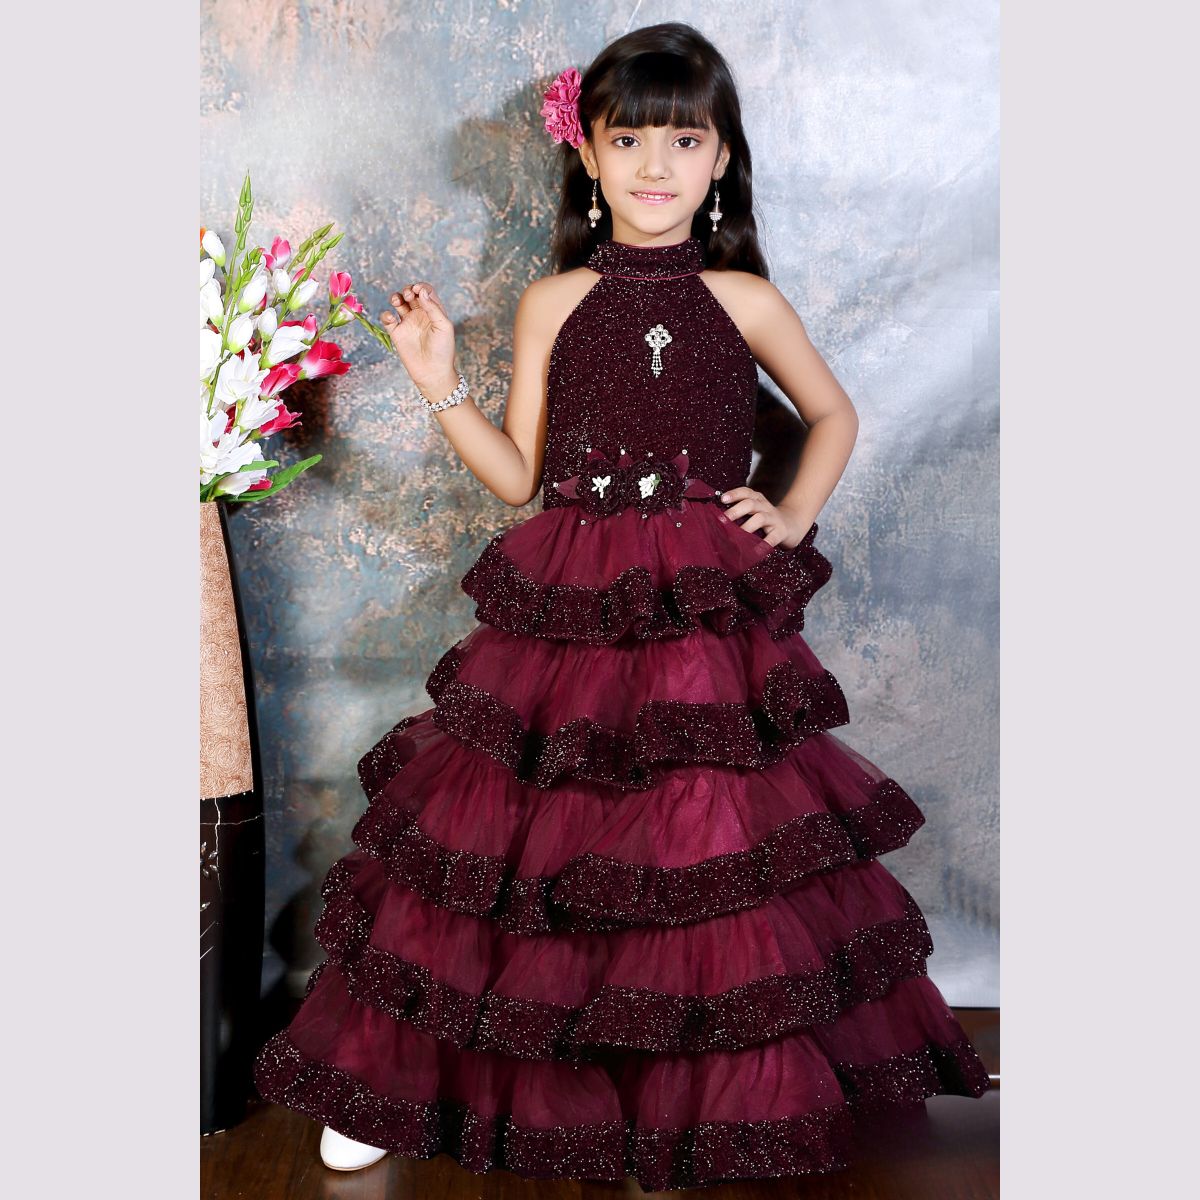 B91xZ Birthday Dresses For Girls Party Princess Bridesmaid Lace Pageant Girl  Dress Wedding Gown Tulle Tutu Girls Dress&Skirt Blue,Size 10-11 Years -  Walmart.com